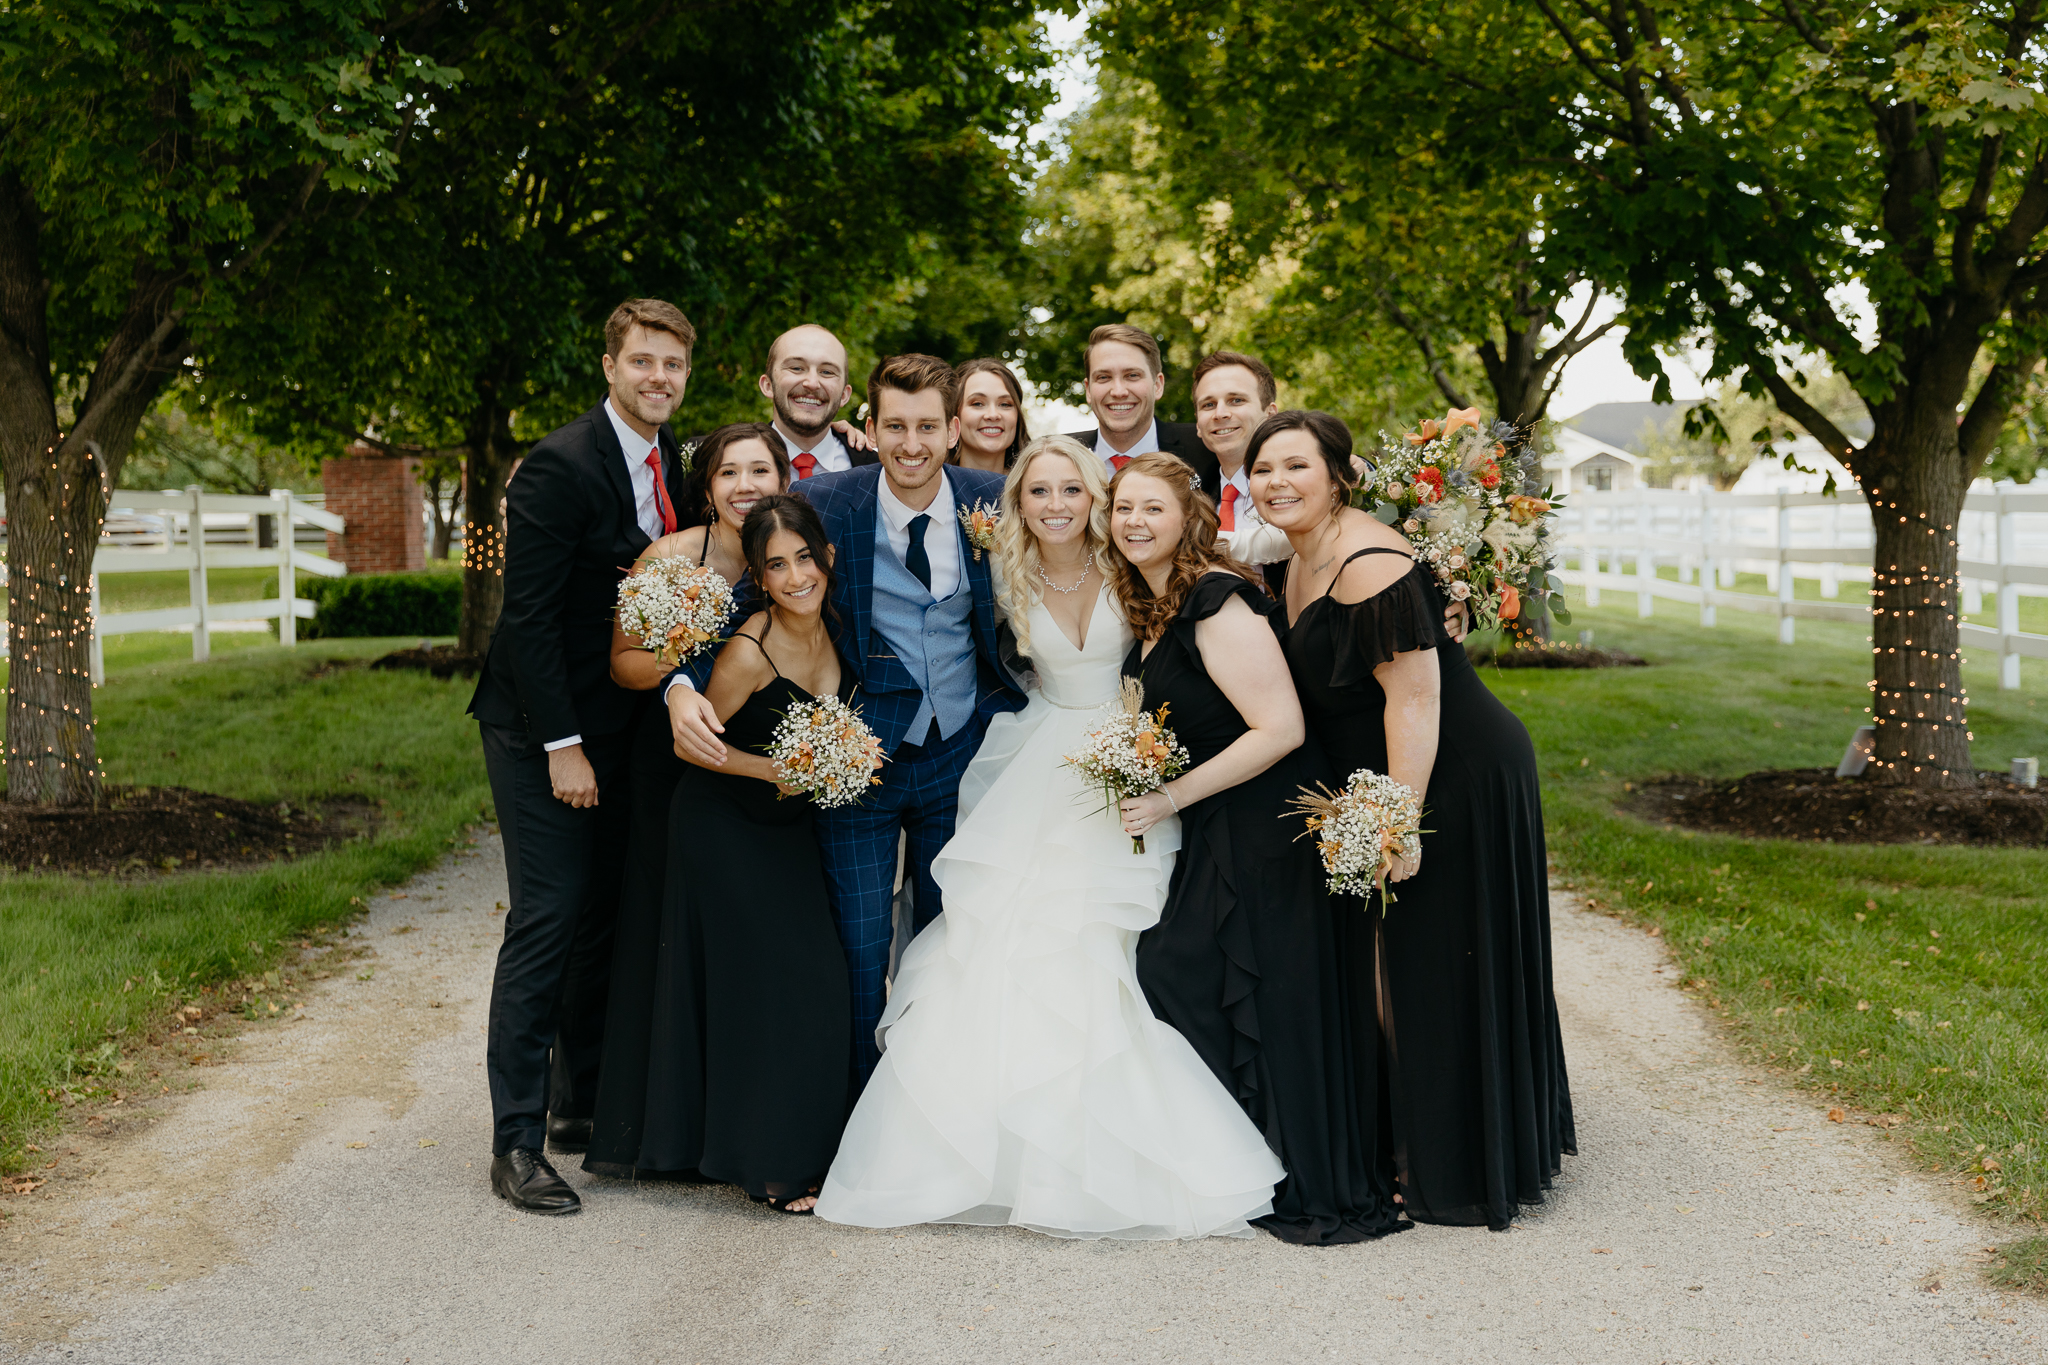 Wedding party of bridesmaids and groomsmen cheer as groom and bride kiss in a tree lined driveway at Northfork Farm